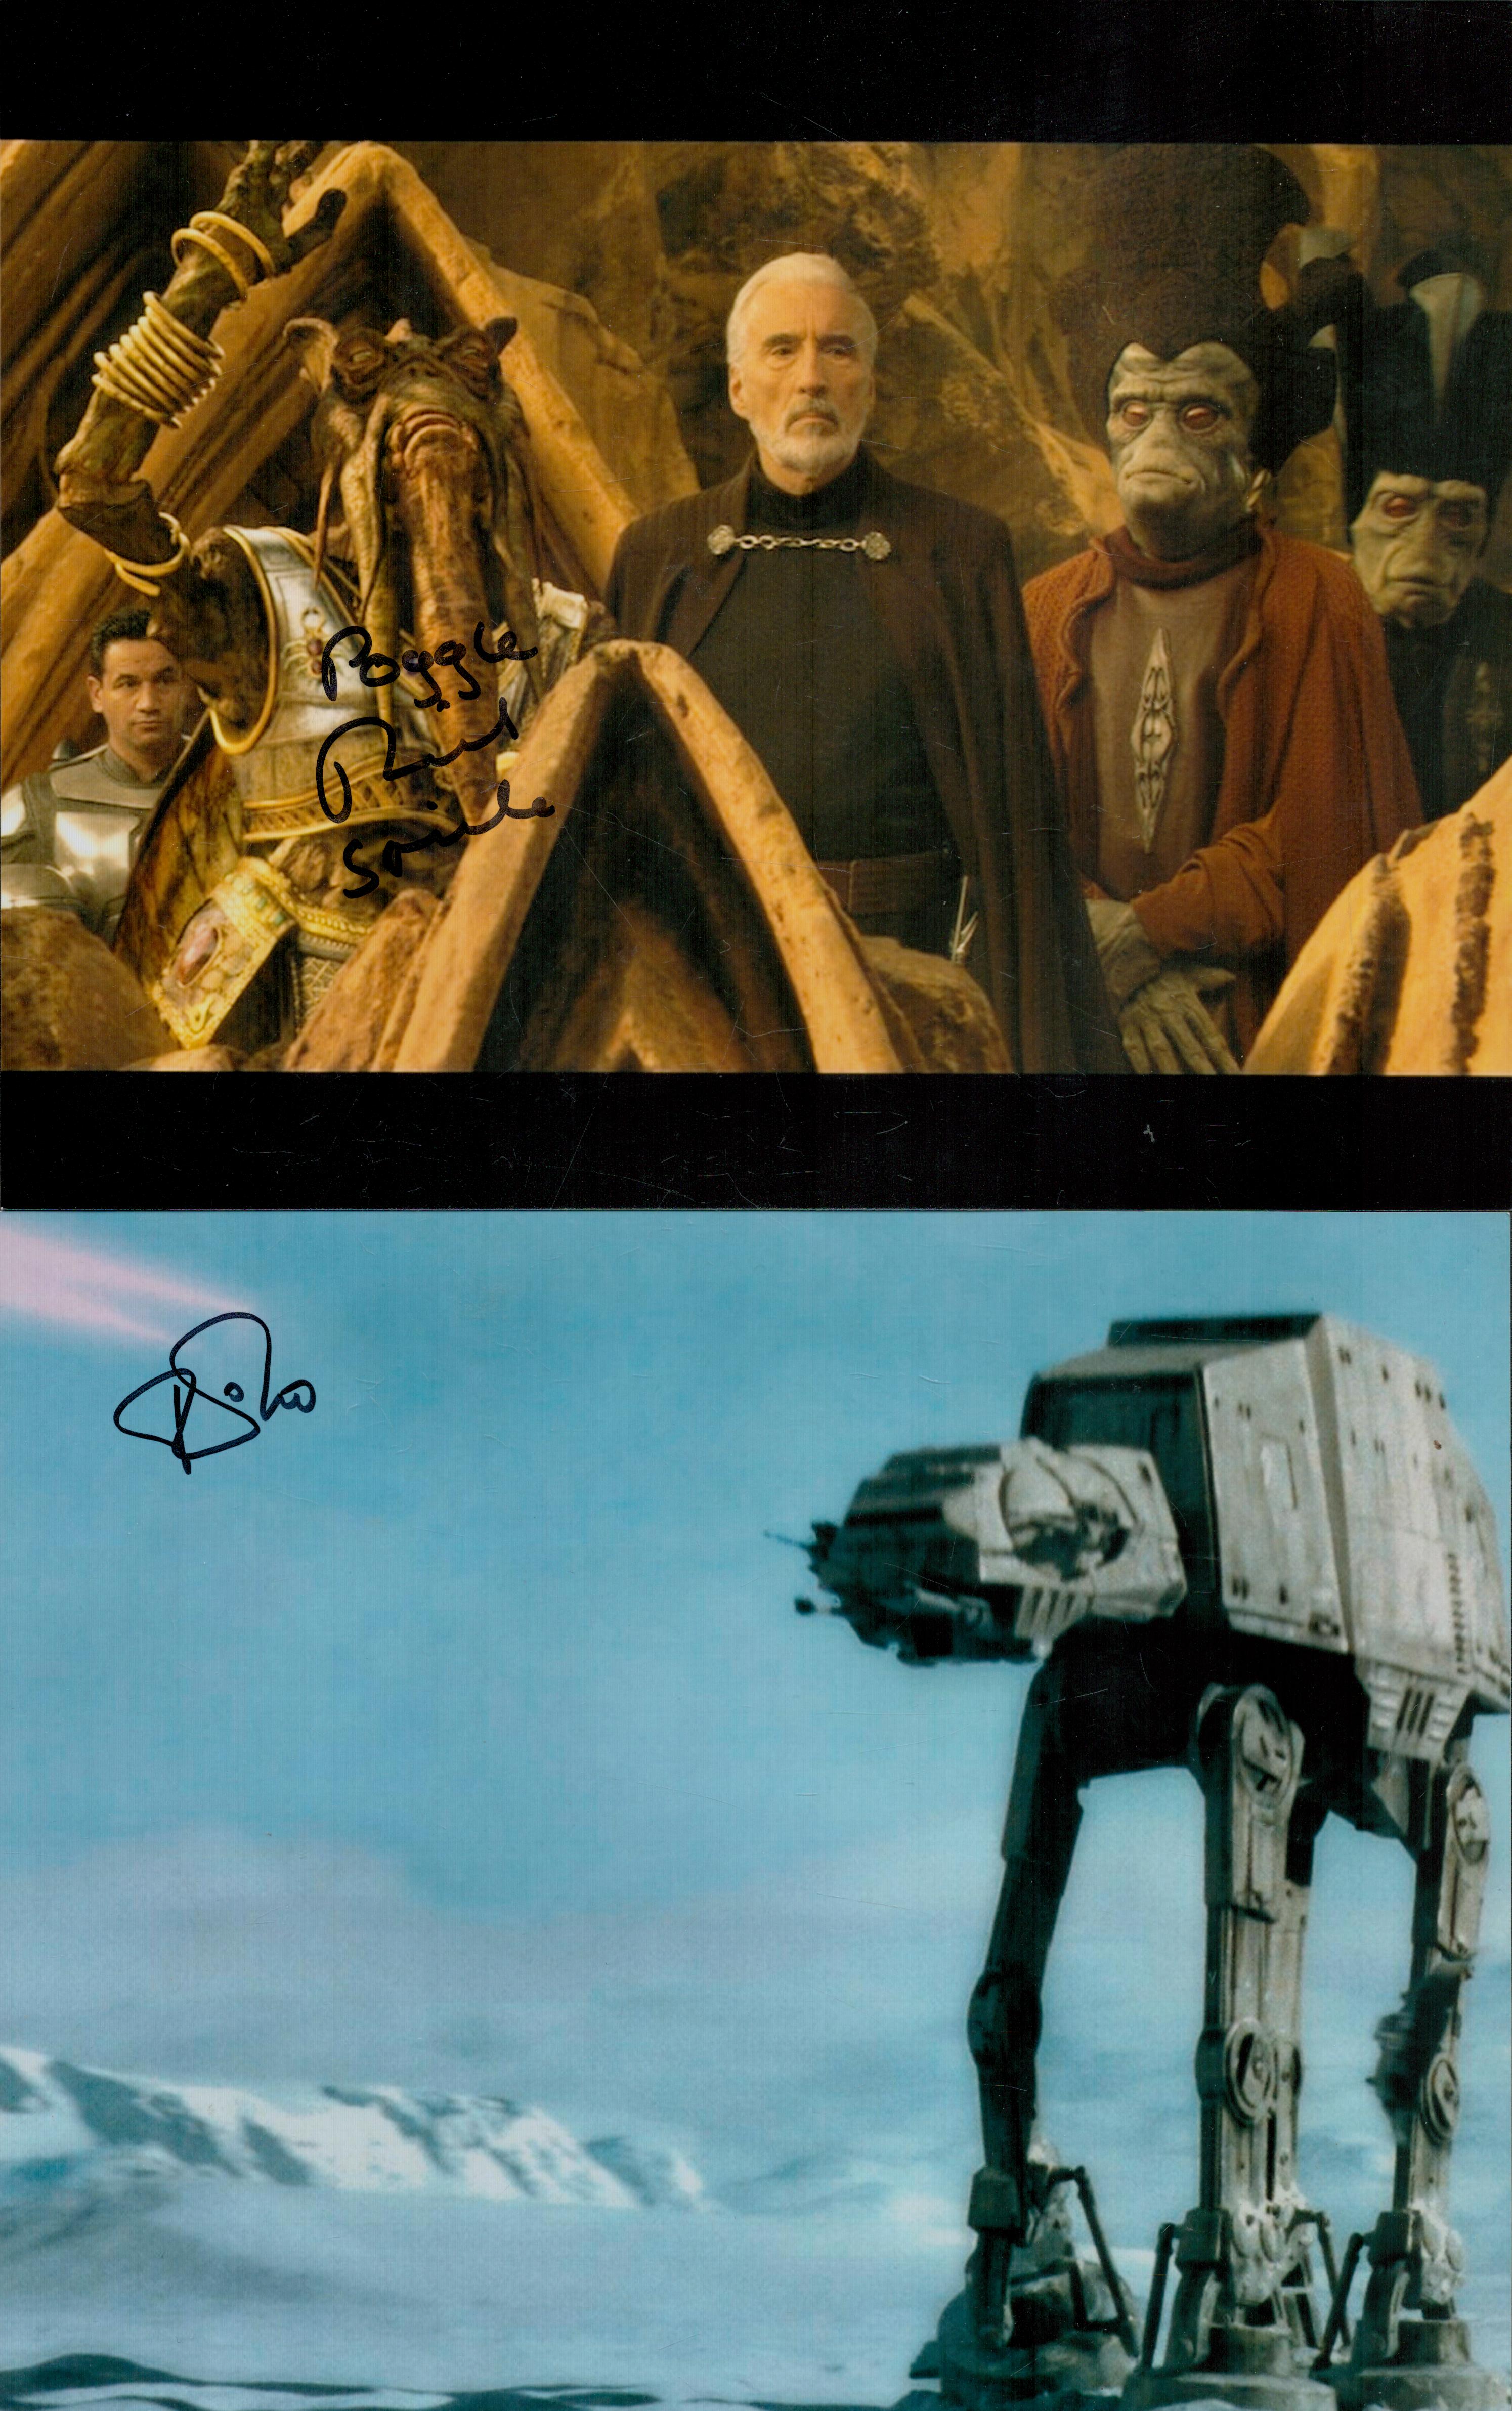 TV/FILM Star Wars. 3 x Collection. Signed by Richard Stride. 10x8 Inch Colour Photo. Good condition.